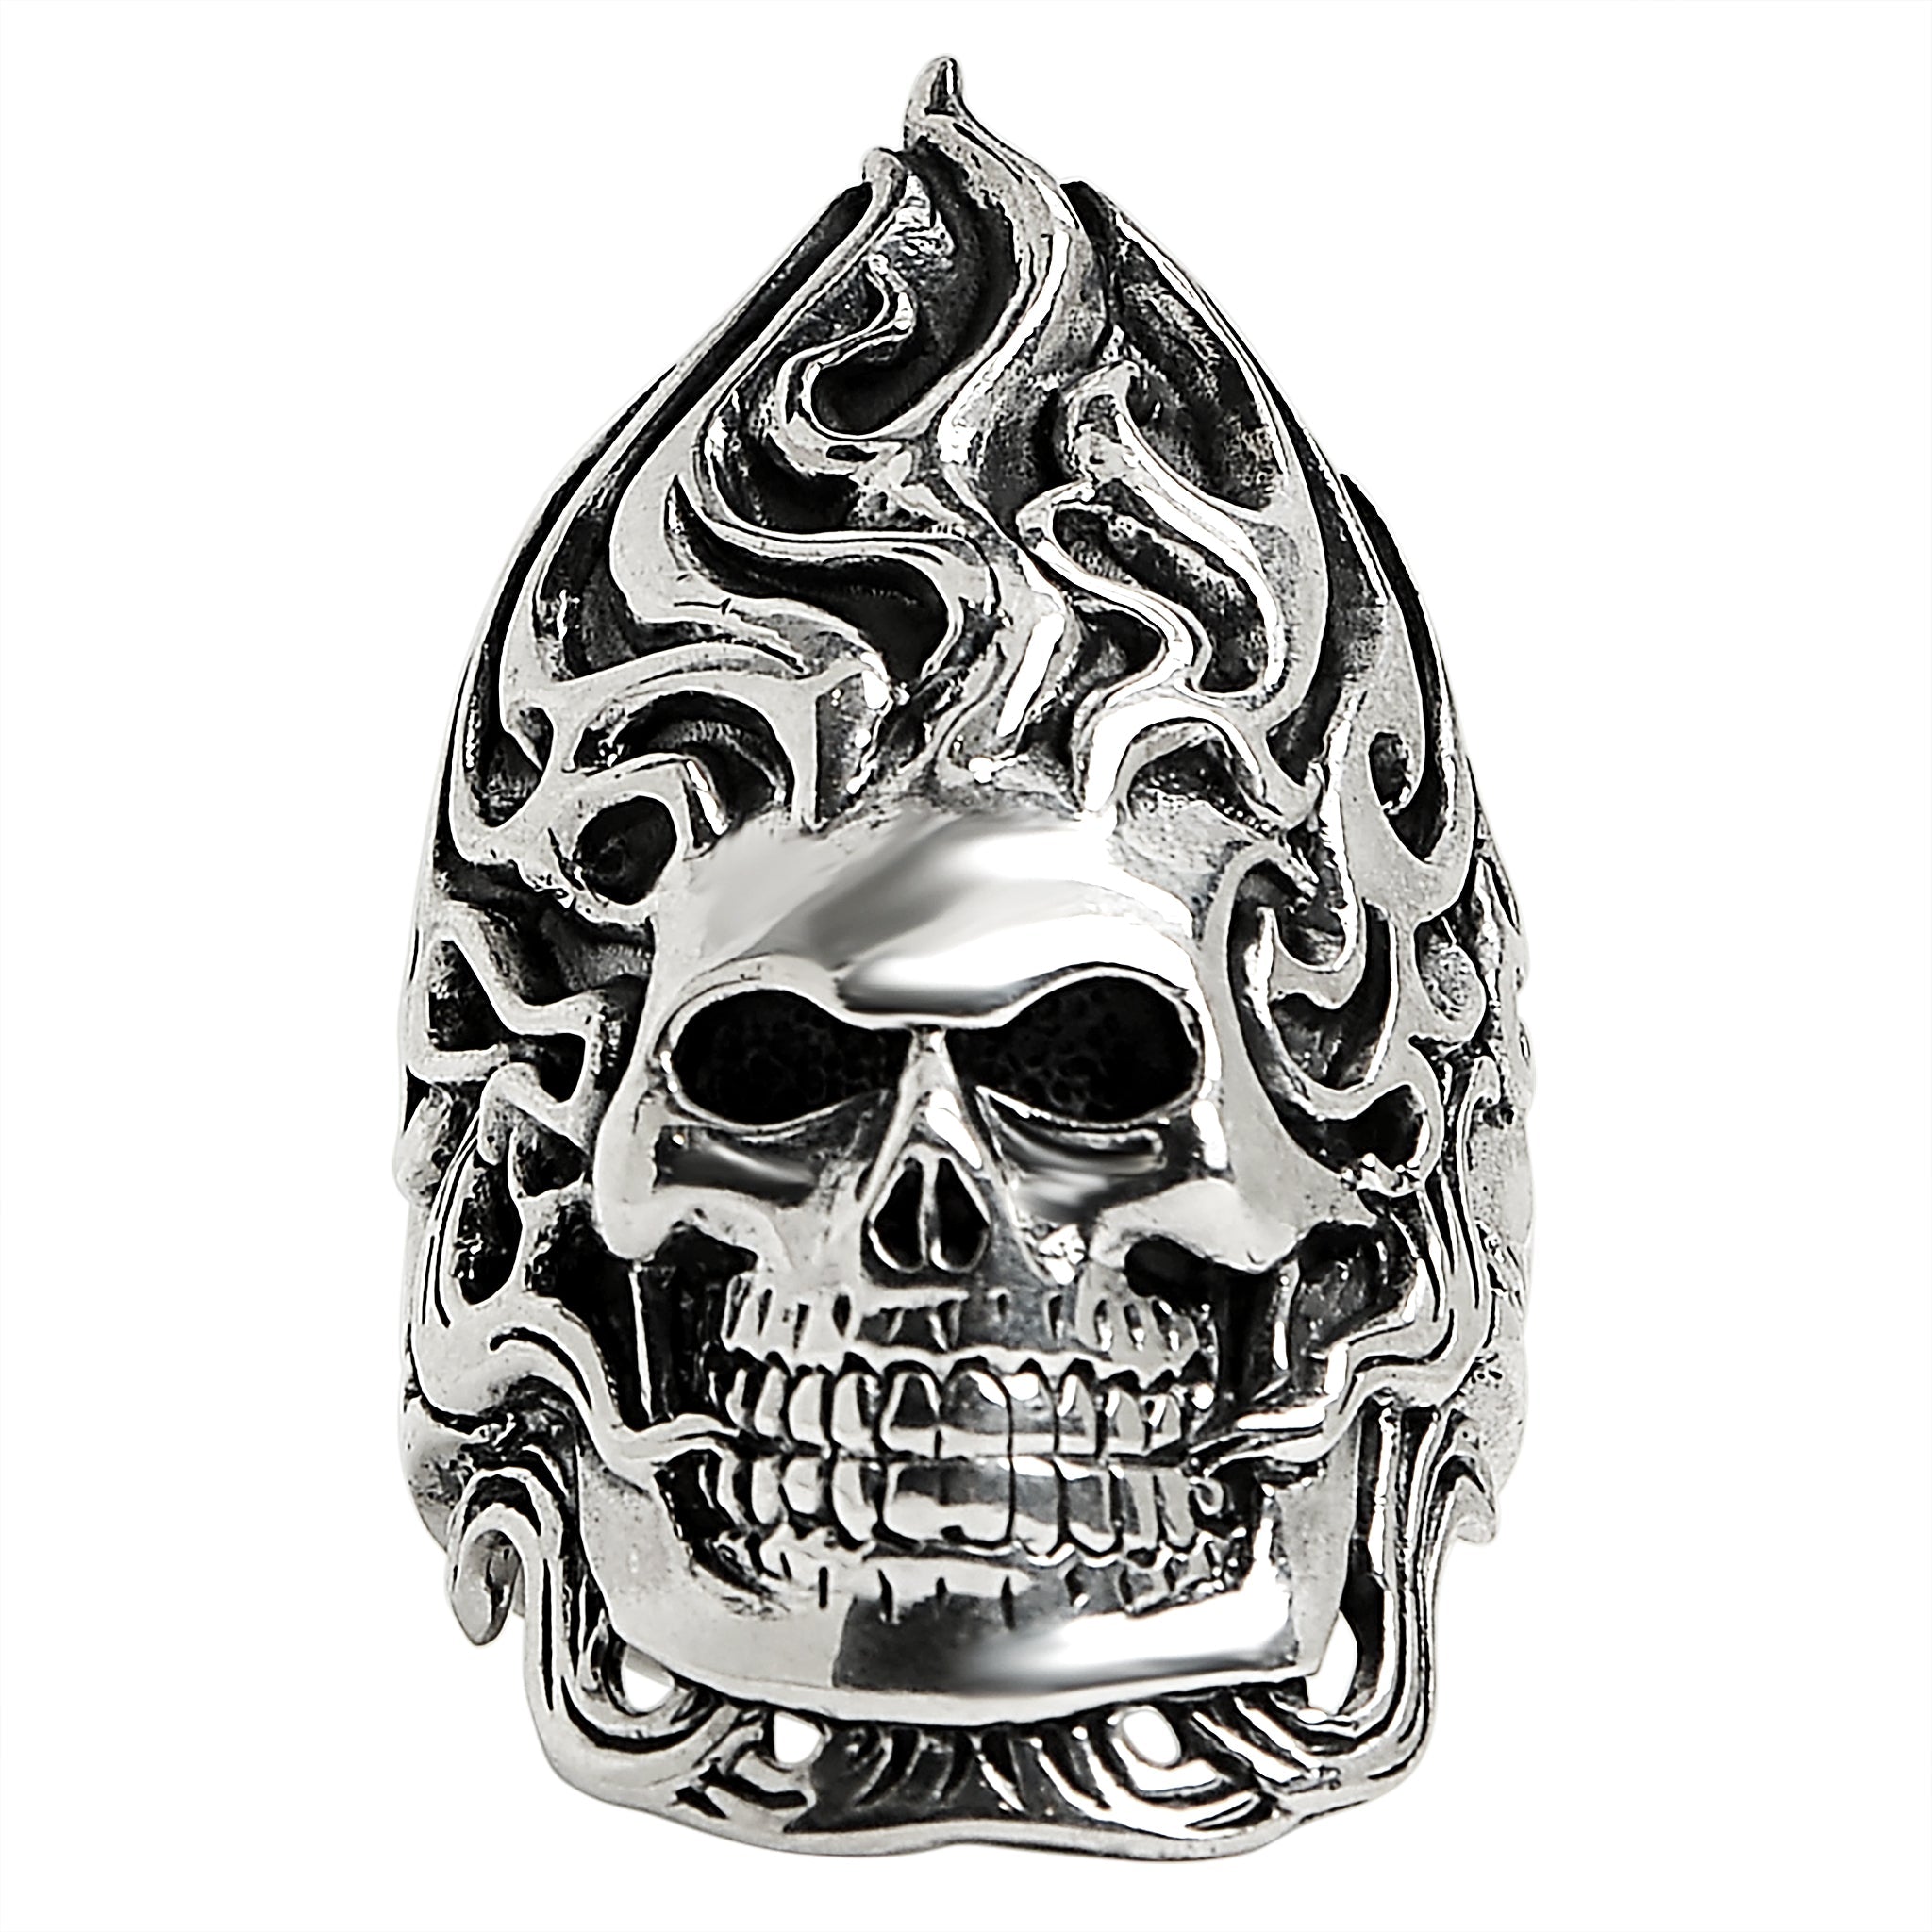 Sterling Silver Flaming Skull with Chain Accents Ring / SSR0006-sterling silver pendant- .925 sterling silver pendant- Black Friday Gift- silver pendant- necklace pendant